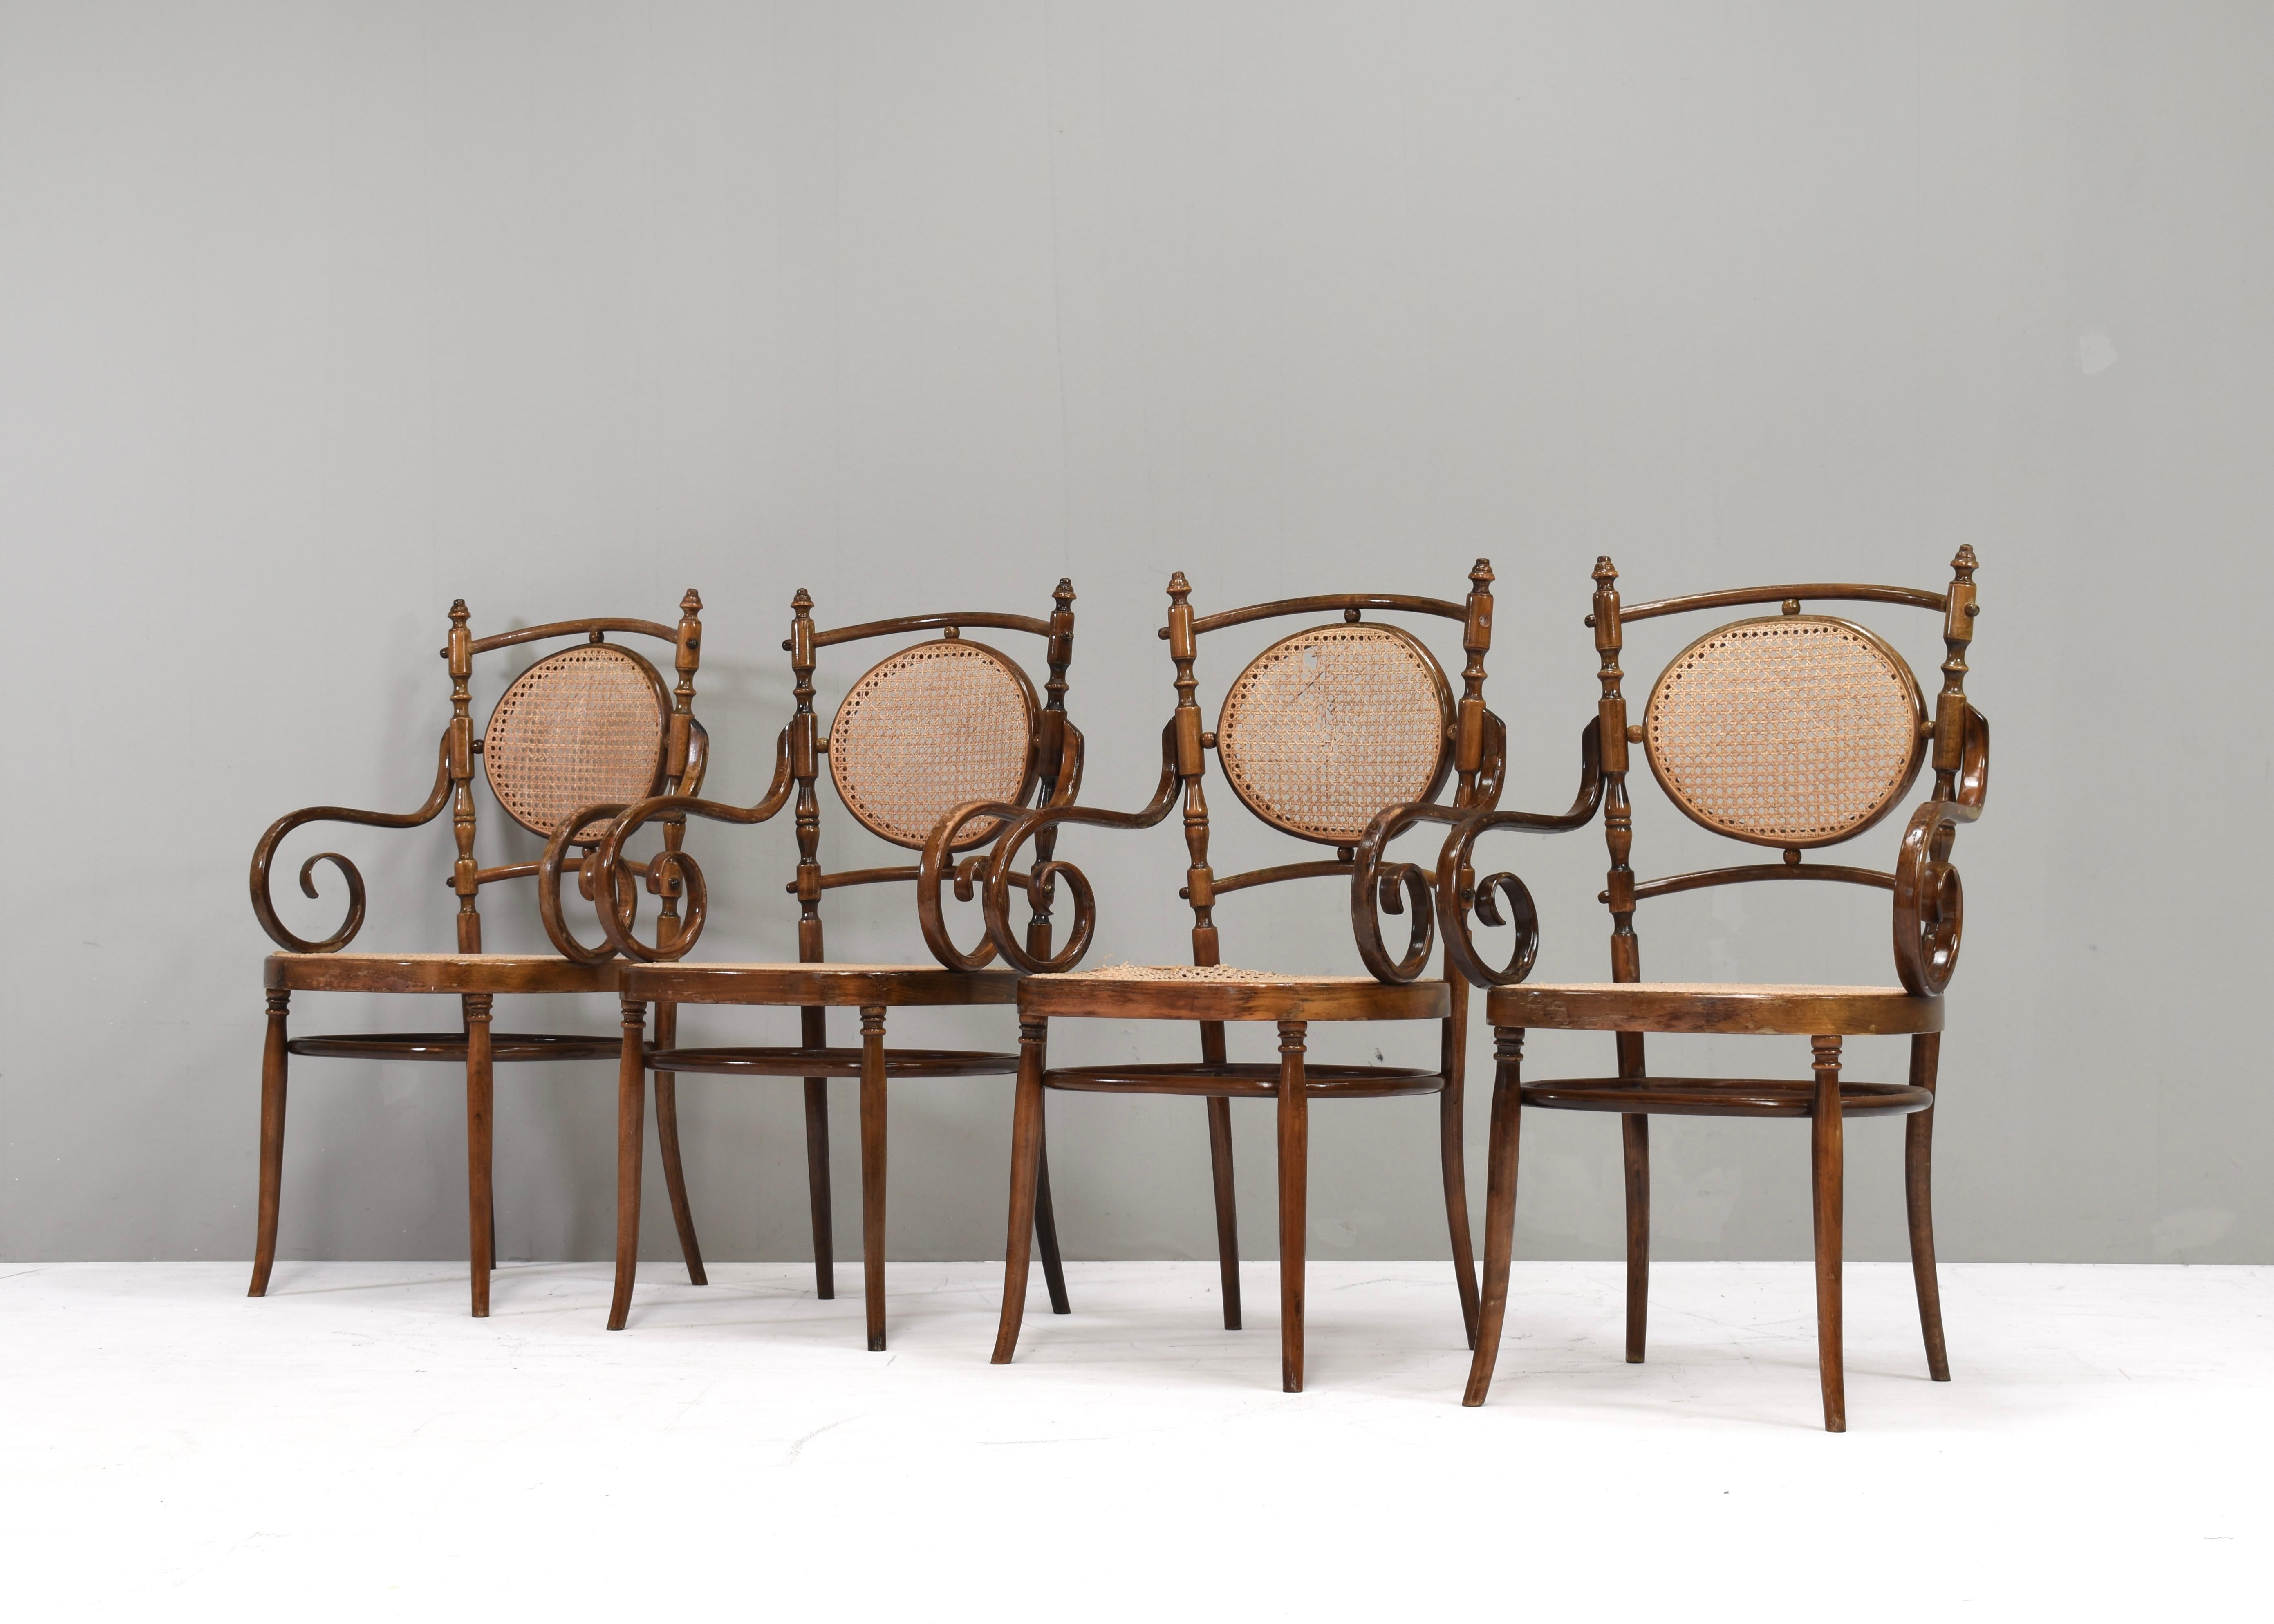 Set of 4 No. 17 dining arm chairs in bentwood and cane 'long john' chairs and table designed by Michael Thonet. Originally designed in the 1860s and produced by Thonet in the 20th century by multiple factories.
Size:
chairs: 57x49x96.5 seat height